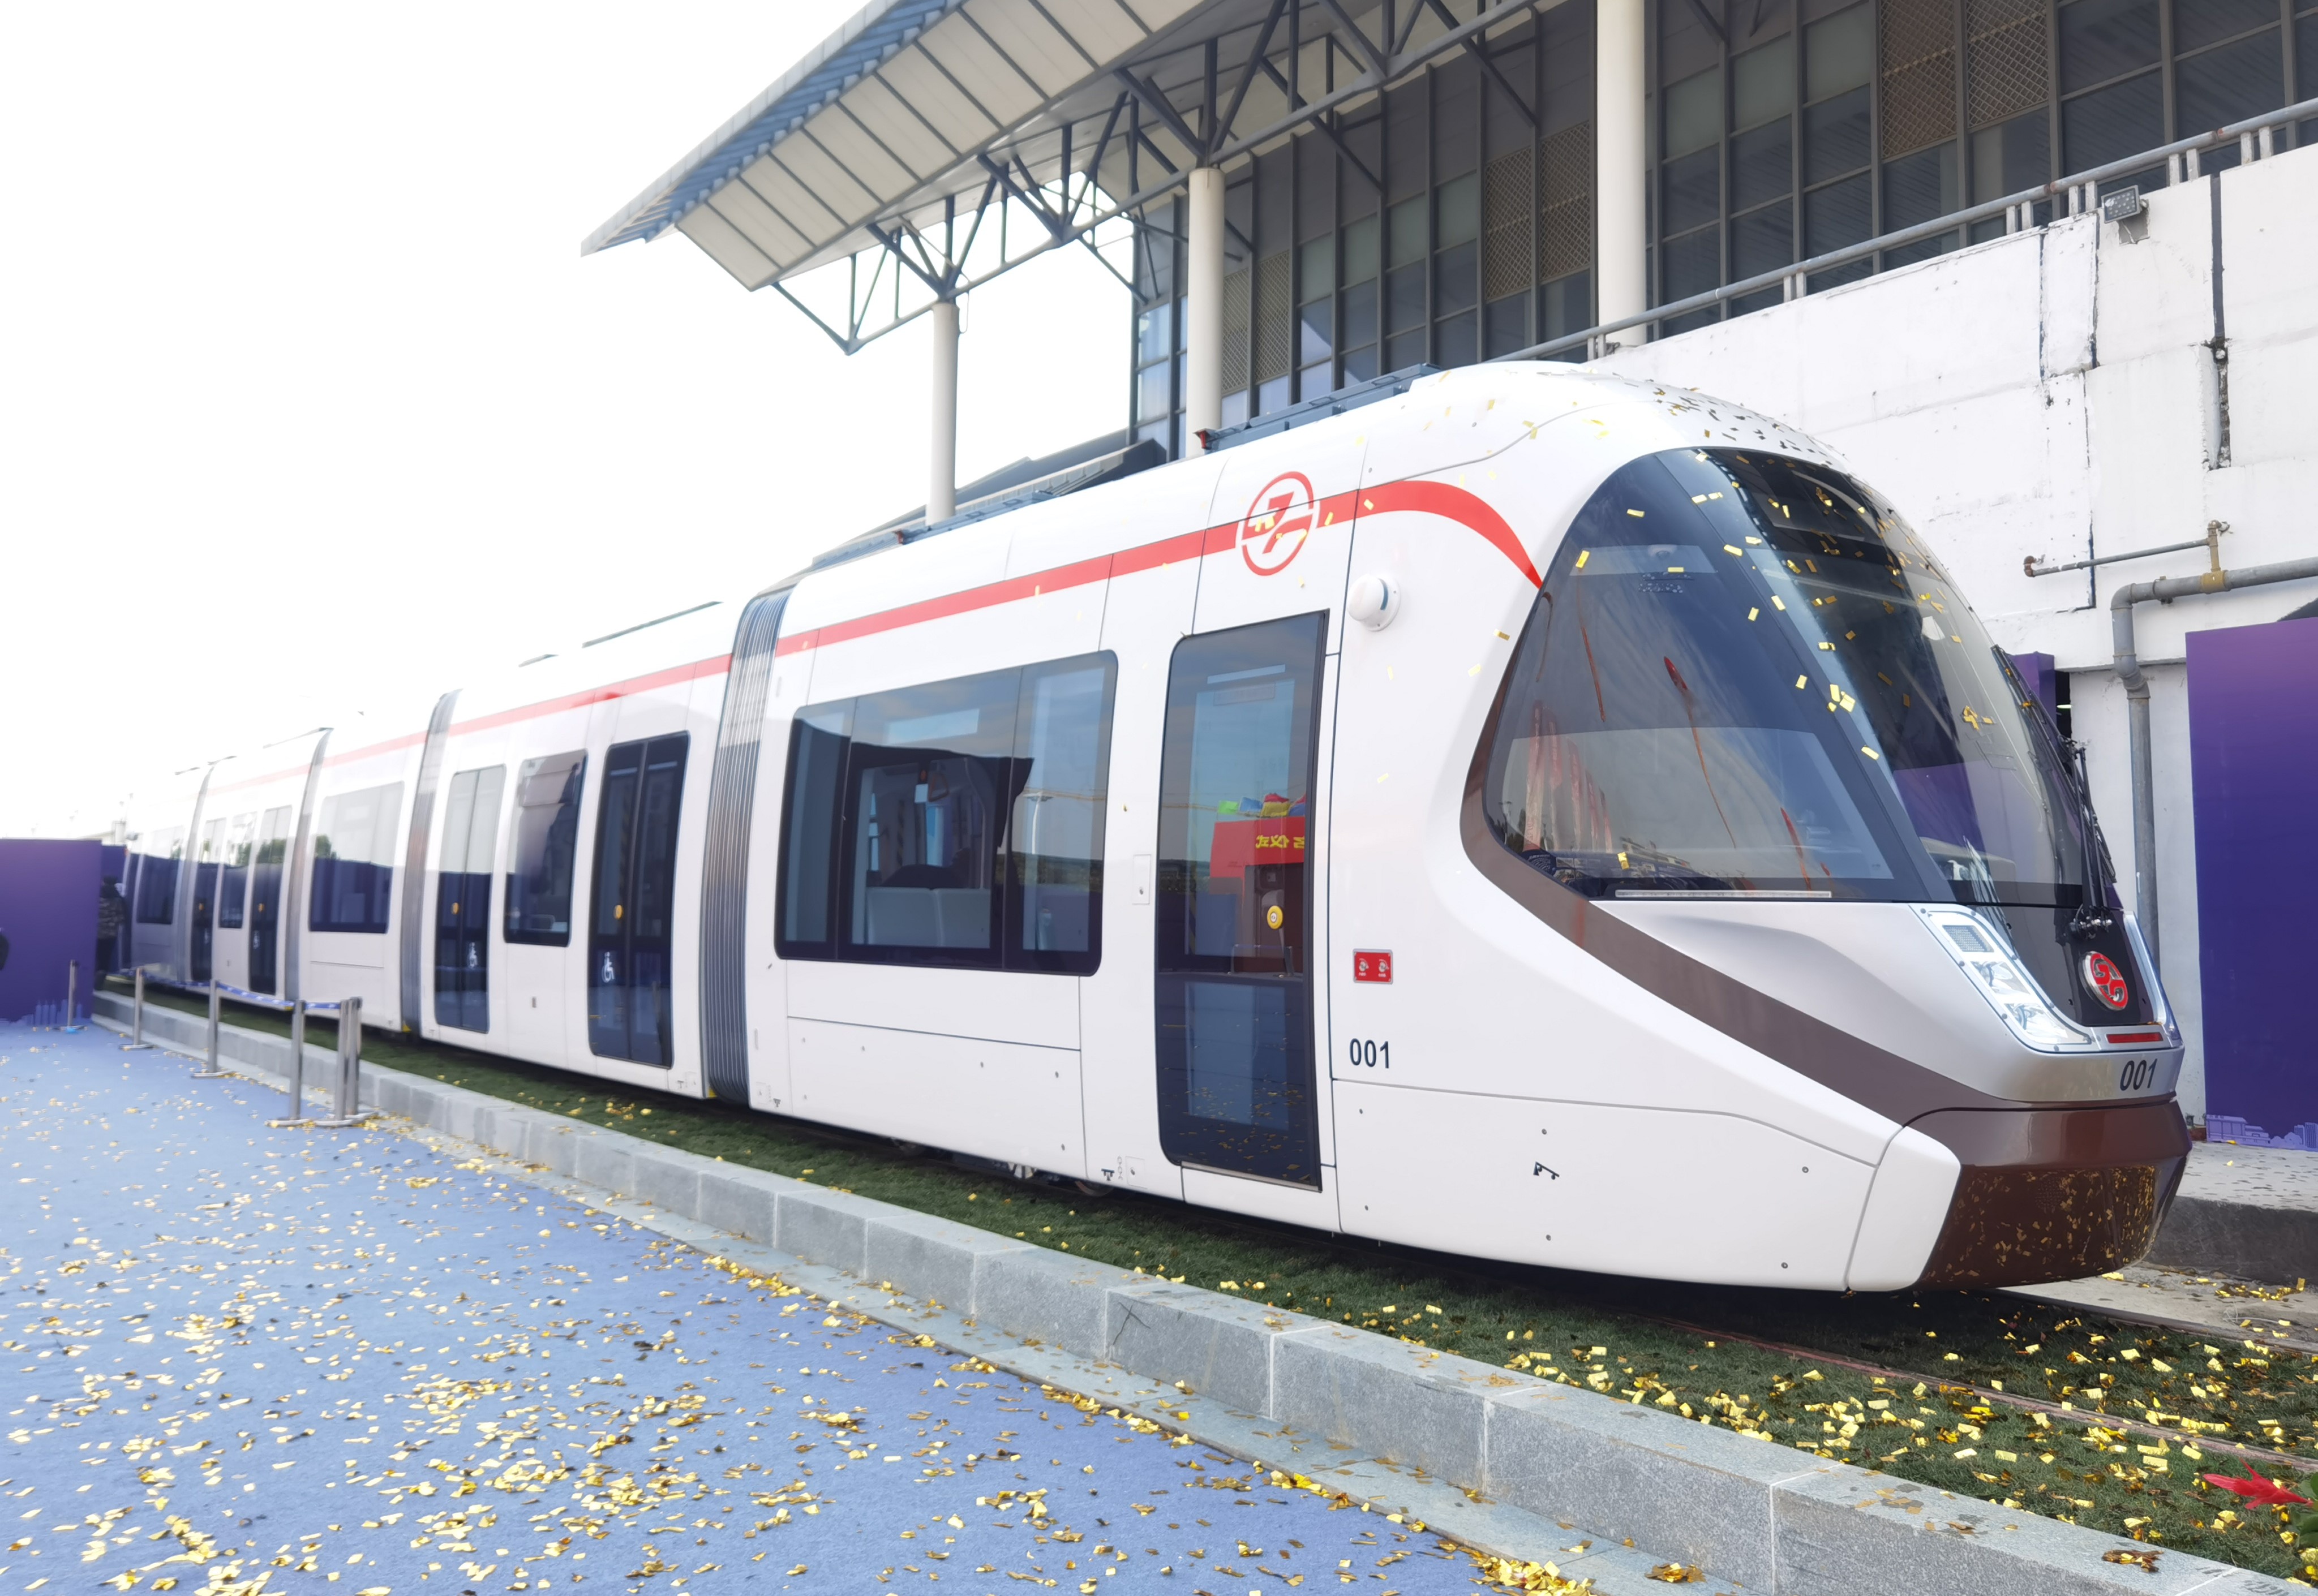 A new CRRC tram made from 90% recyclable materials